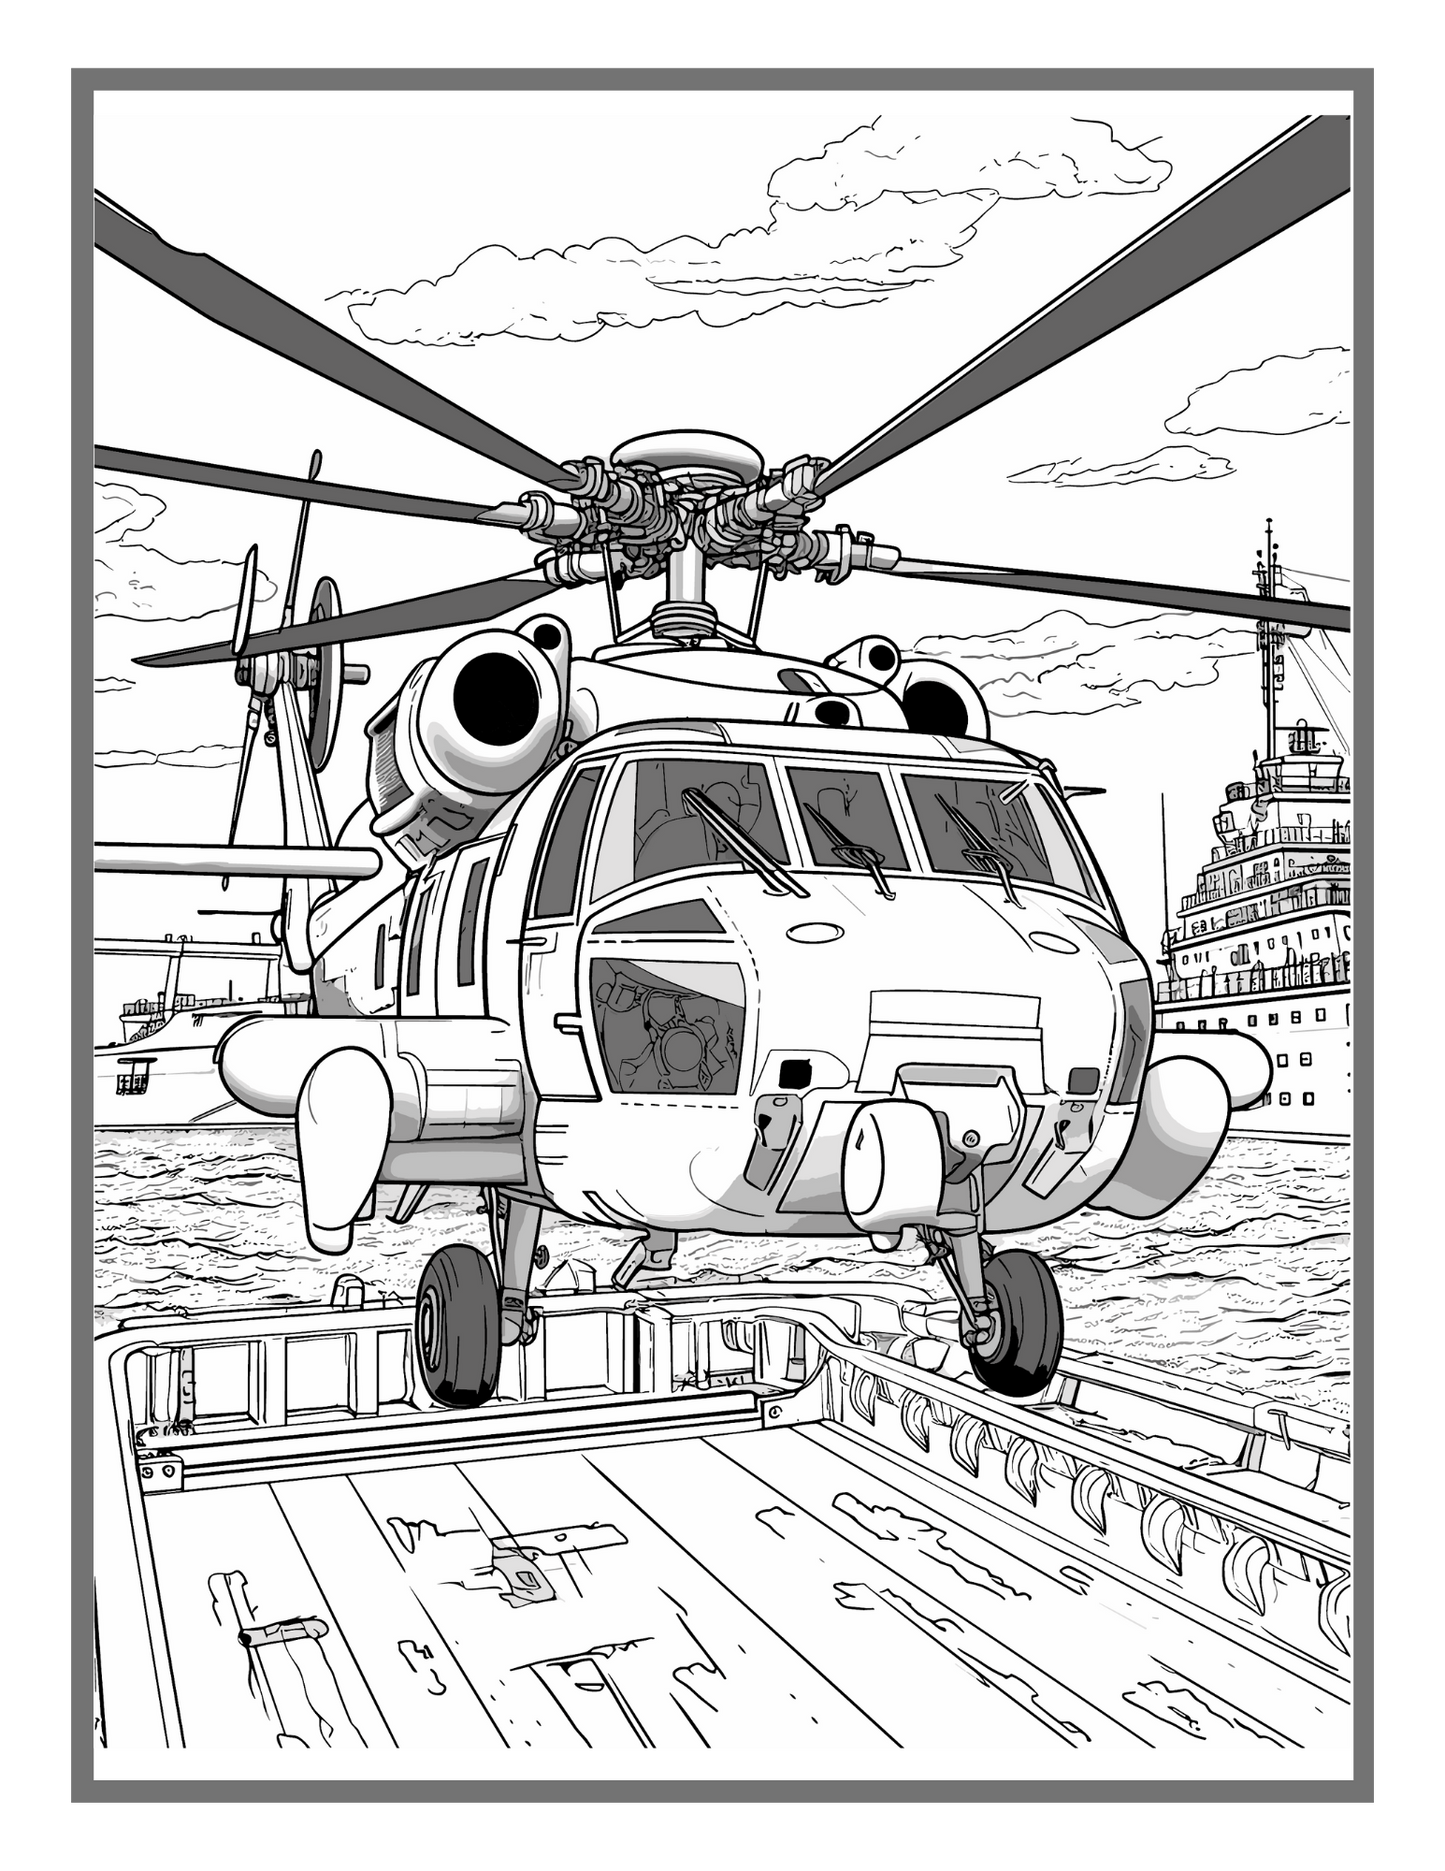 Military Army Soldier Coloring Book For Kids Military Coloring Pages Army Coloring Books Boys US Army Coloring Book Army Man Coloring Gift